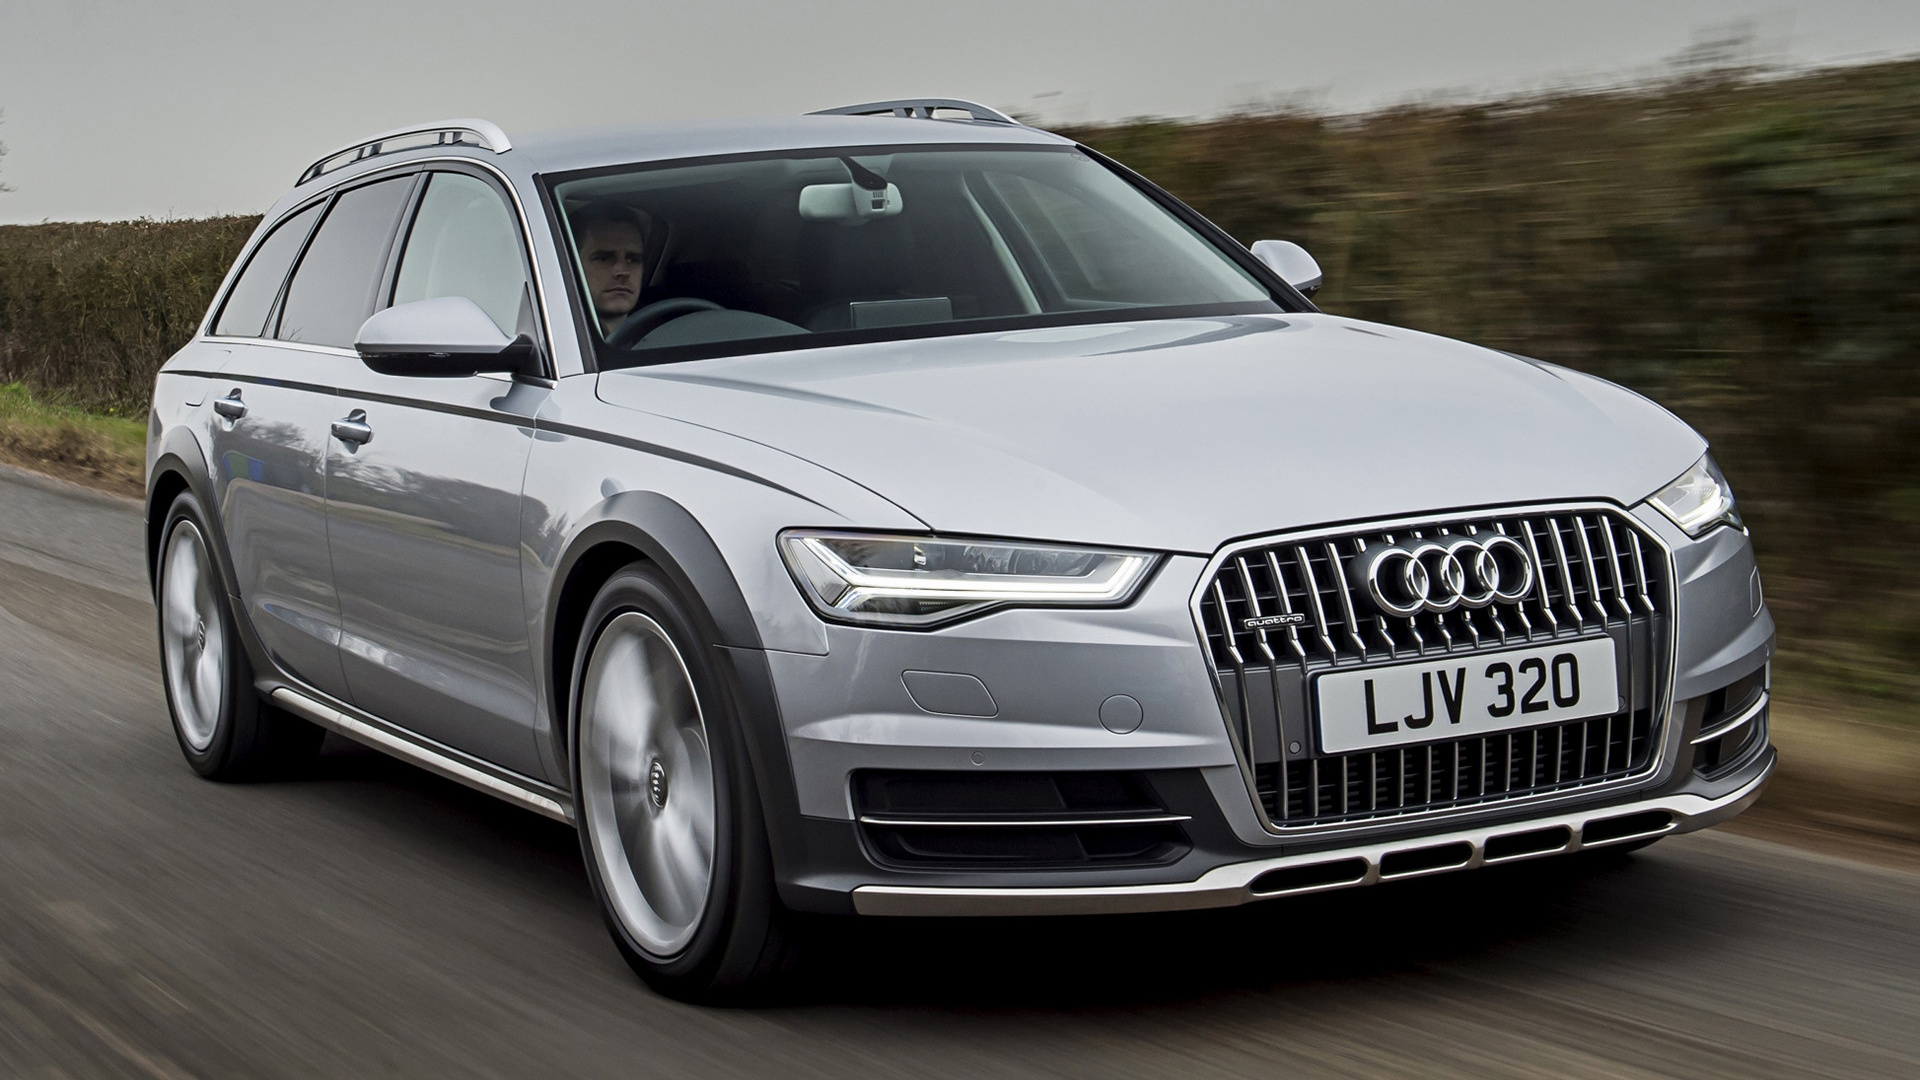 2014 Audi A6 Allroad (UK) Wallpapers and HD Images Car